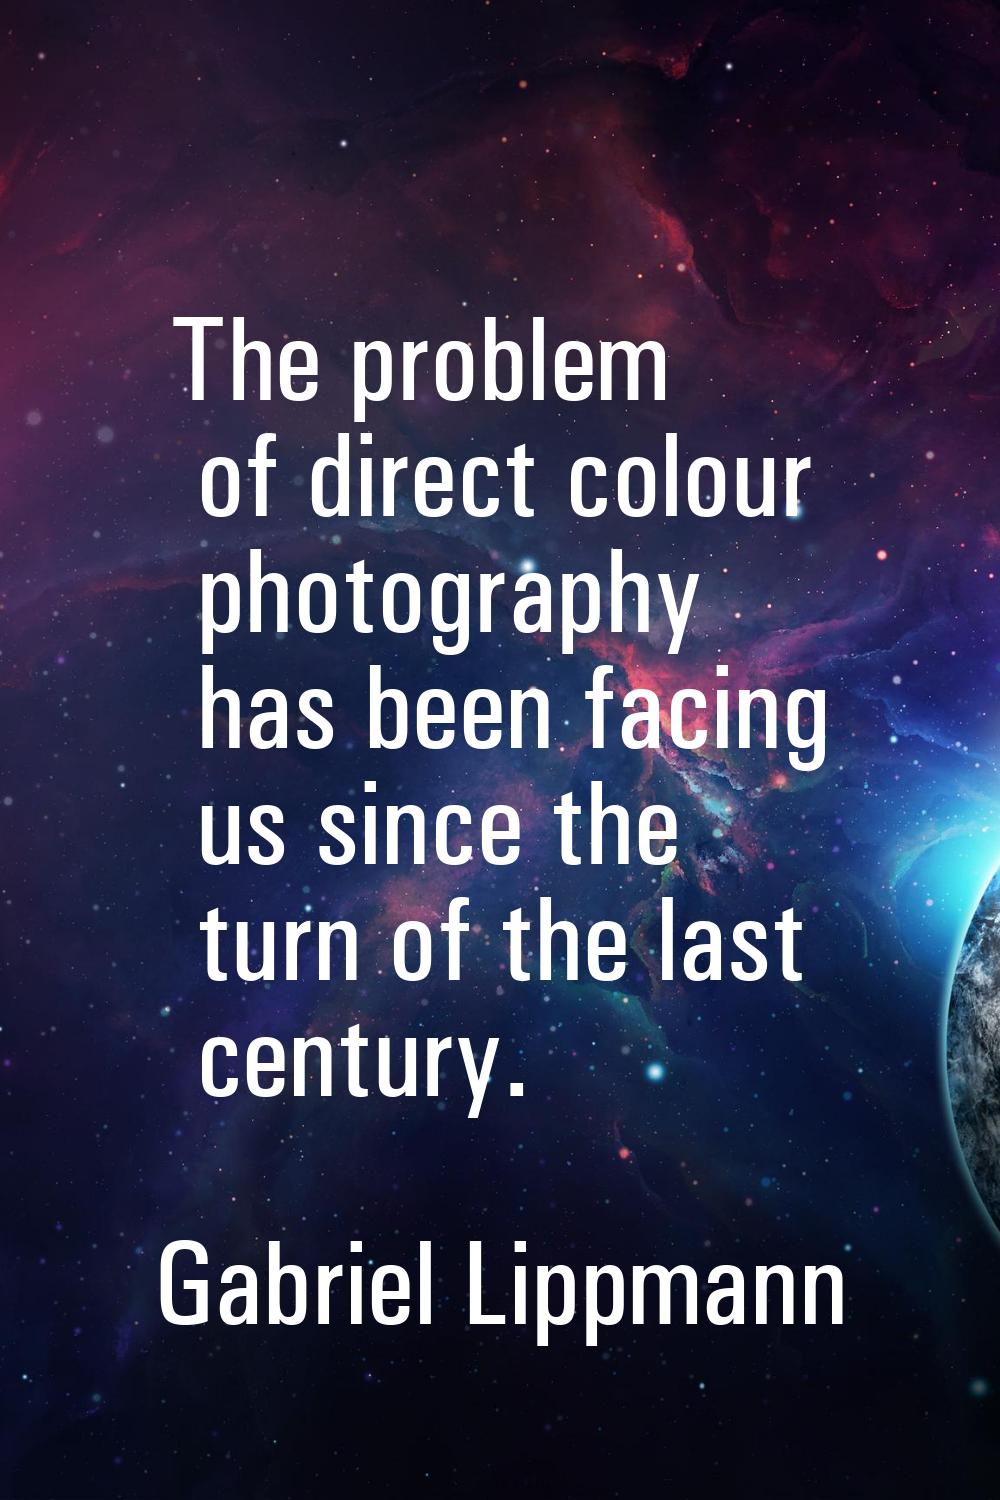 The problem of direct colour photography has been facing us since the turn of the last century.